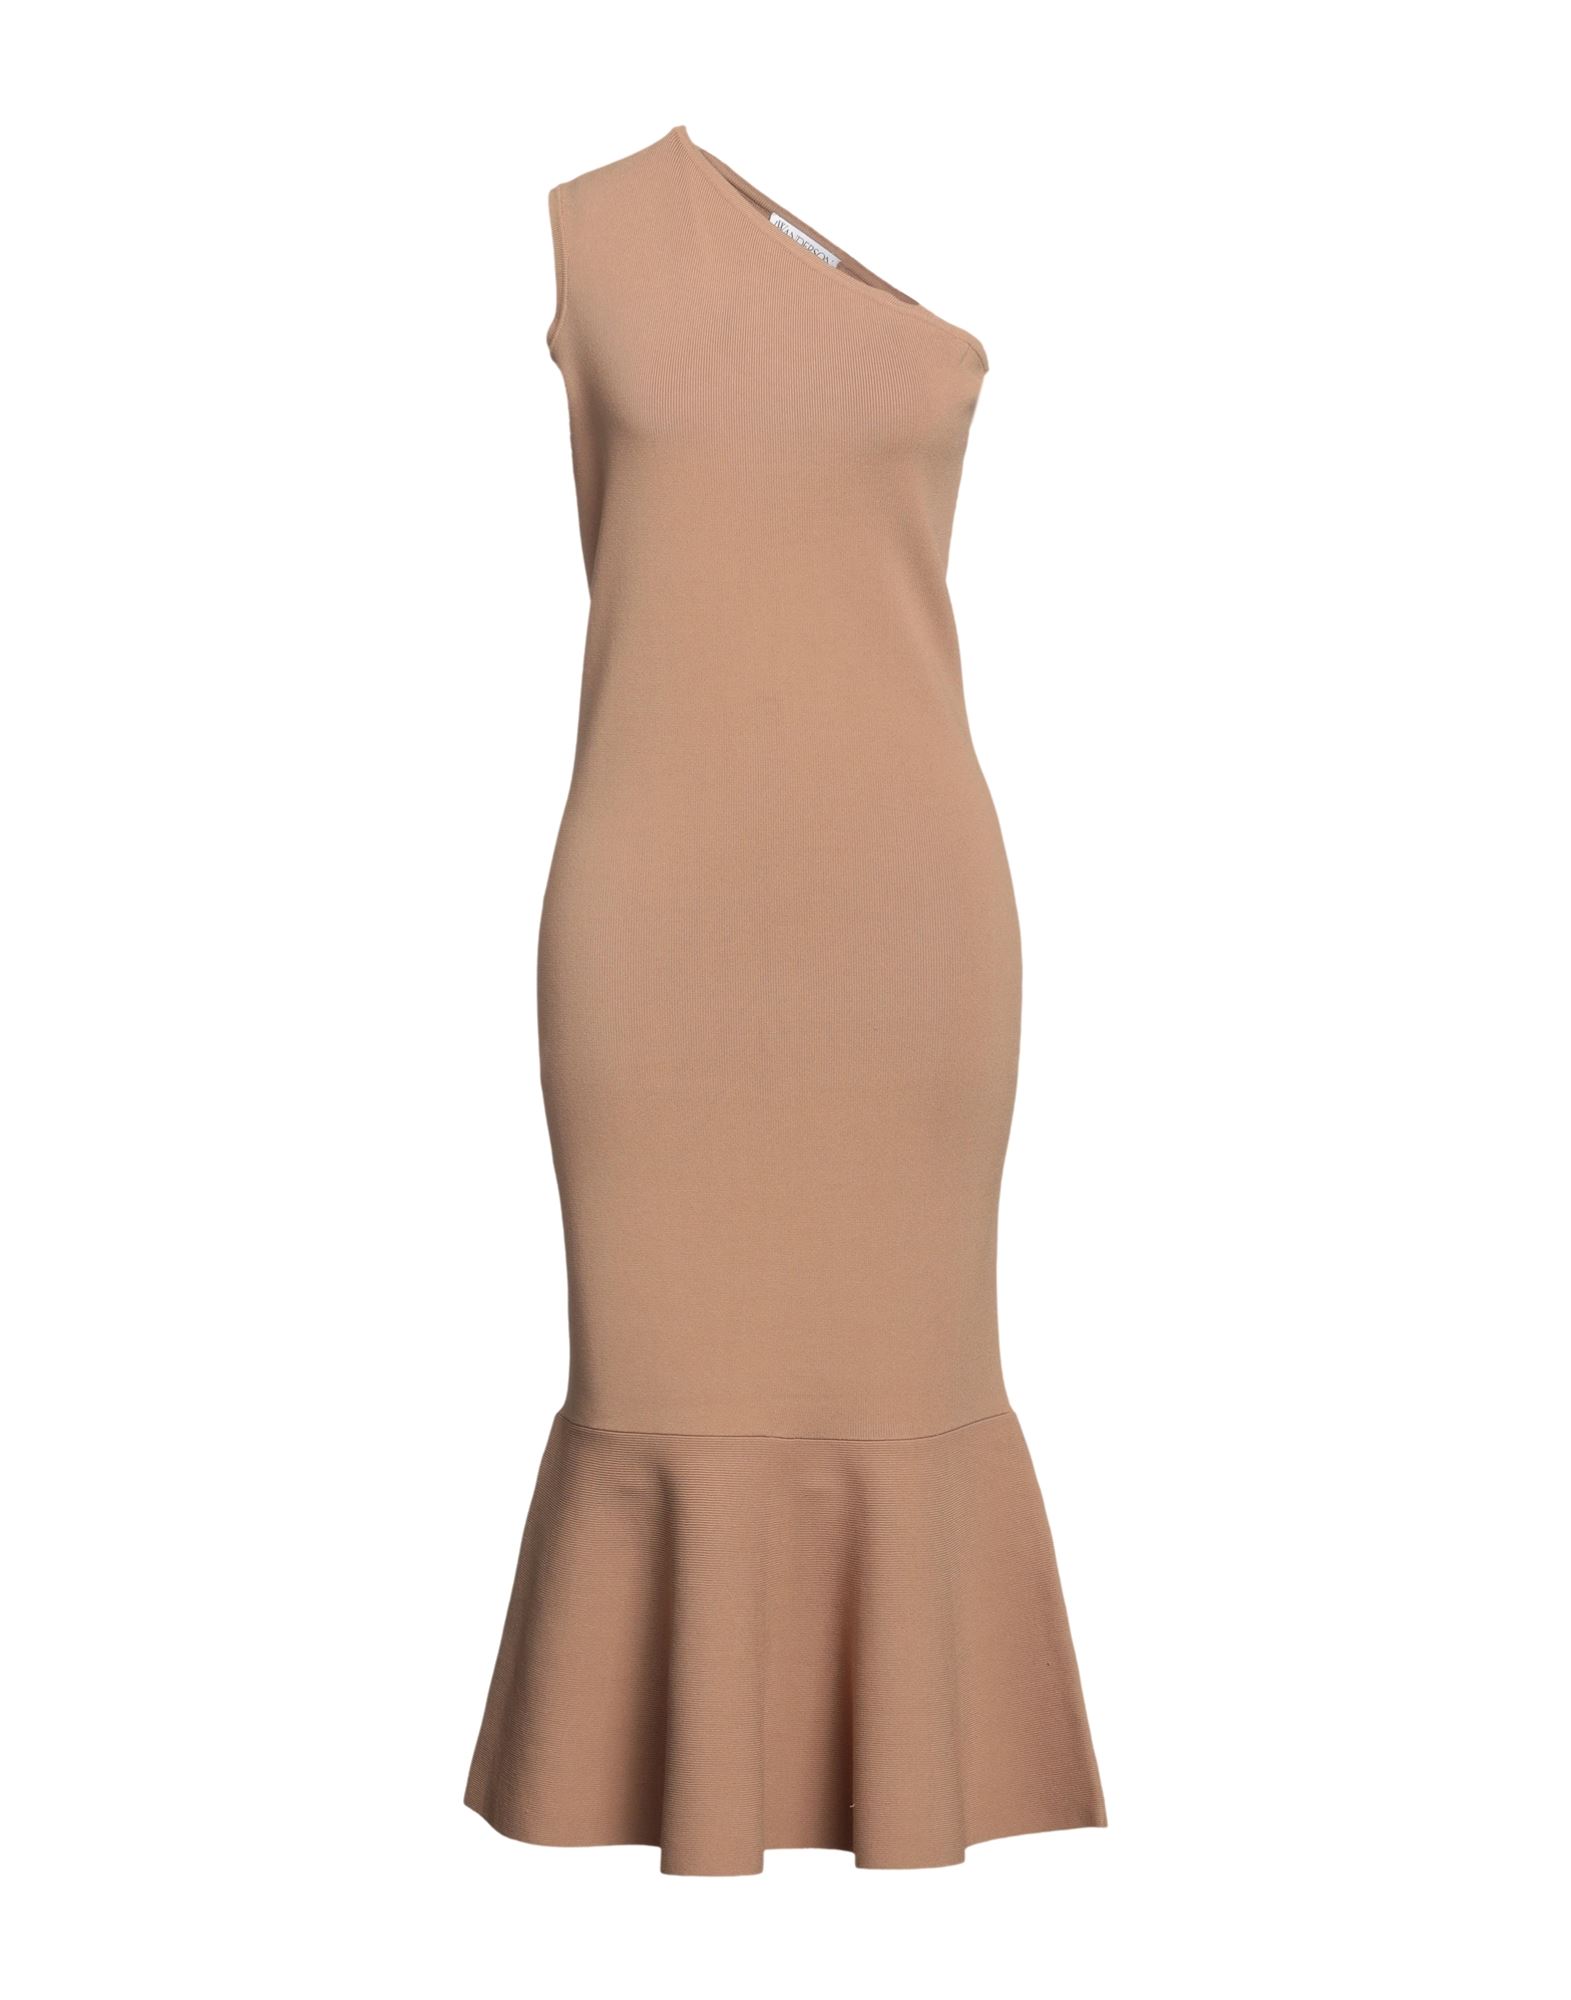 JW ANDERSON JW ANDERSON WOMAN MIDI DRESS CAMEL SIZE S VISCOSE, POLYESTER